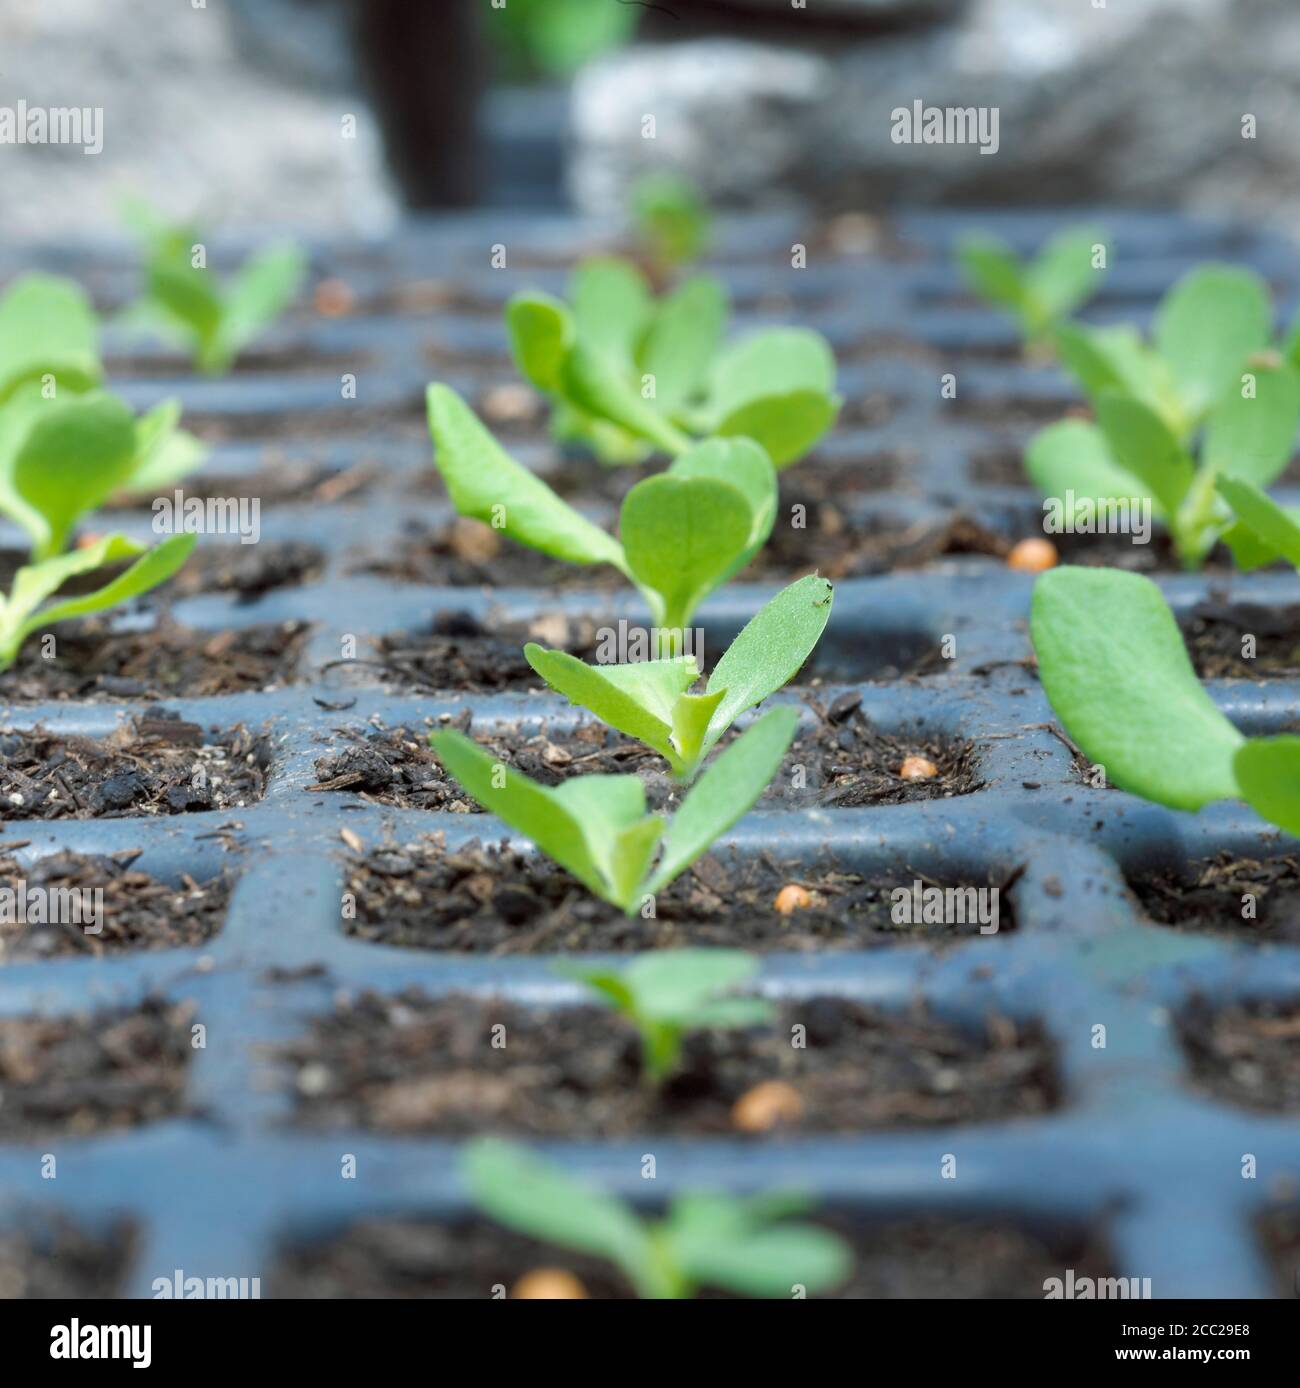 Seedlings in vessel, close-up Stock Photo